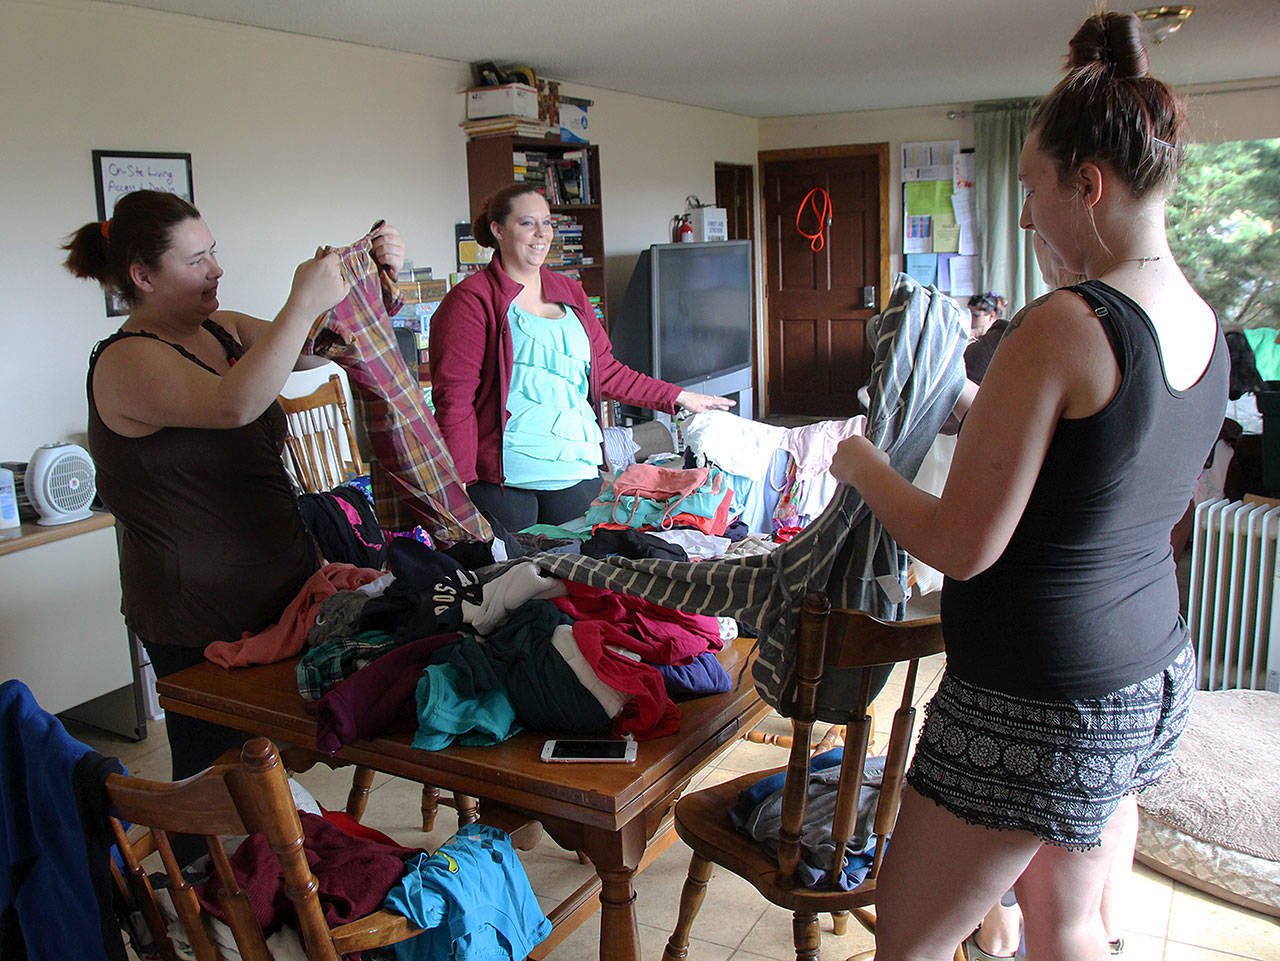 Photo by Jessie Stensland / Whidbey News-Times                                Liz Mickelson, Nikki Shorb and Anna Cavender, from left, sort clothes at a drop-in center at Ryan’s House for Youth in Coupeville. The center has a clothes closet where young people can take clothes and other items they need.